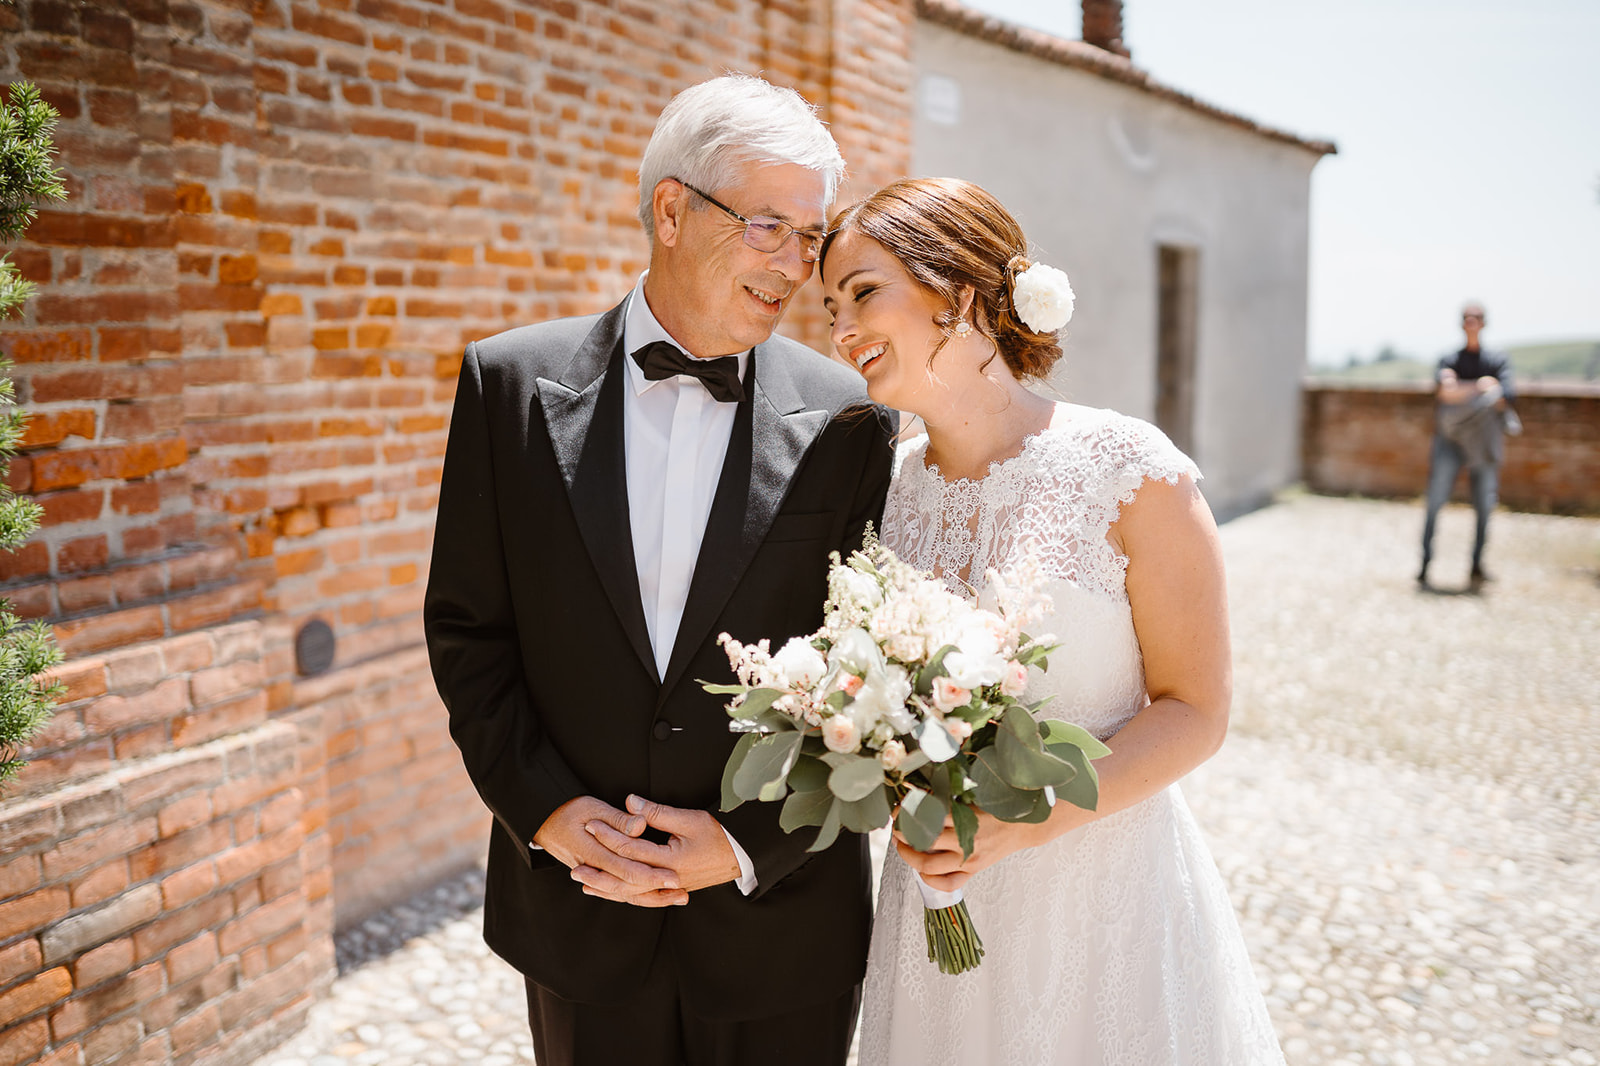 Emotional moments between a bride and her father before entering in Lu Monferrato Church